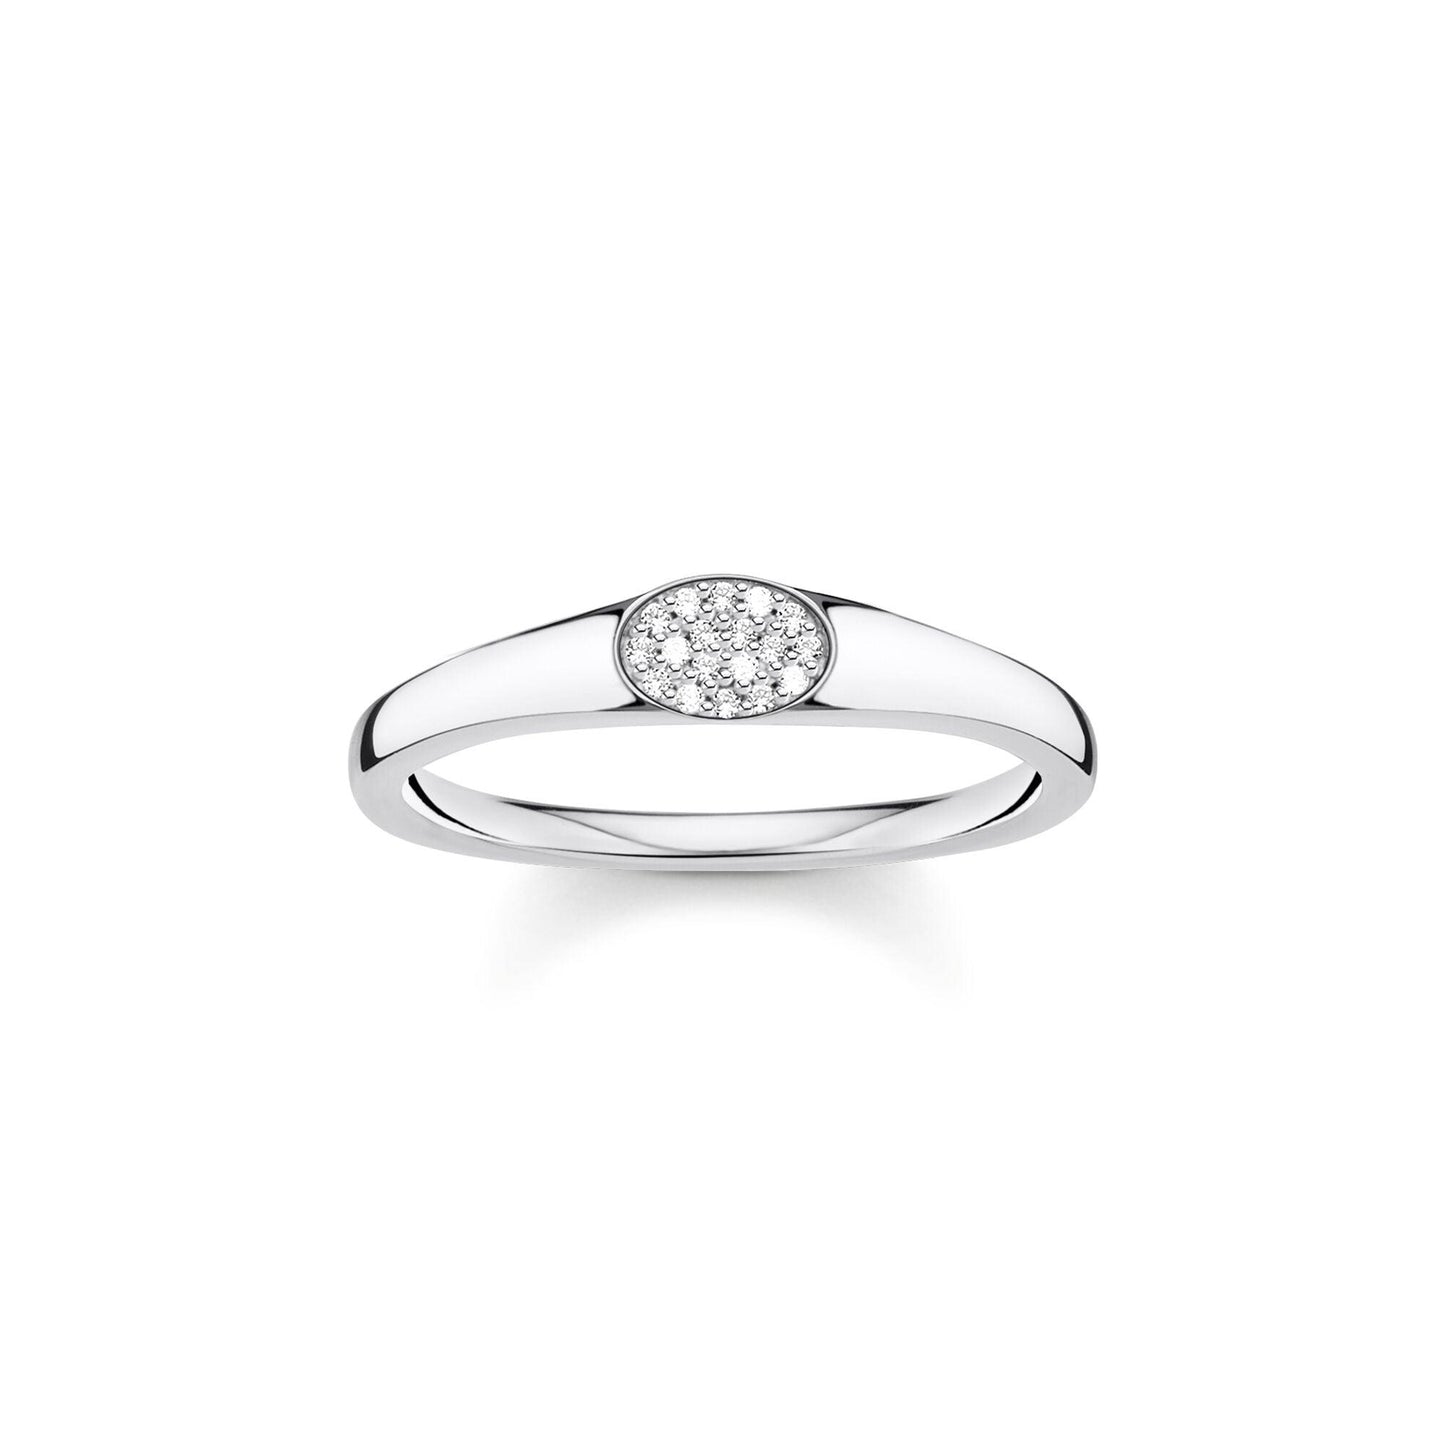 Thomas Sabo Sterling Silver Slim Signet Ring with Cubic Zirconia TR2315-051-14 - Judith Hart Jewellers